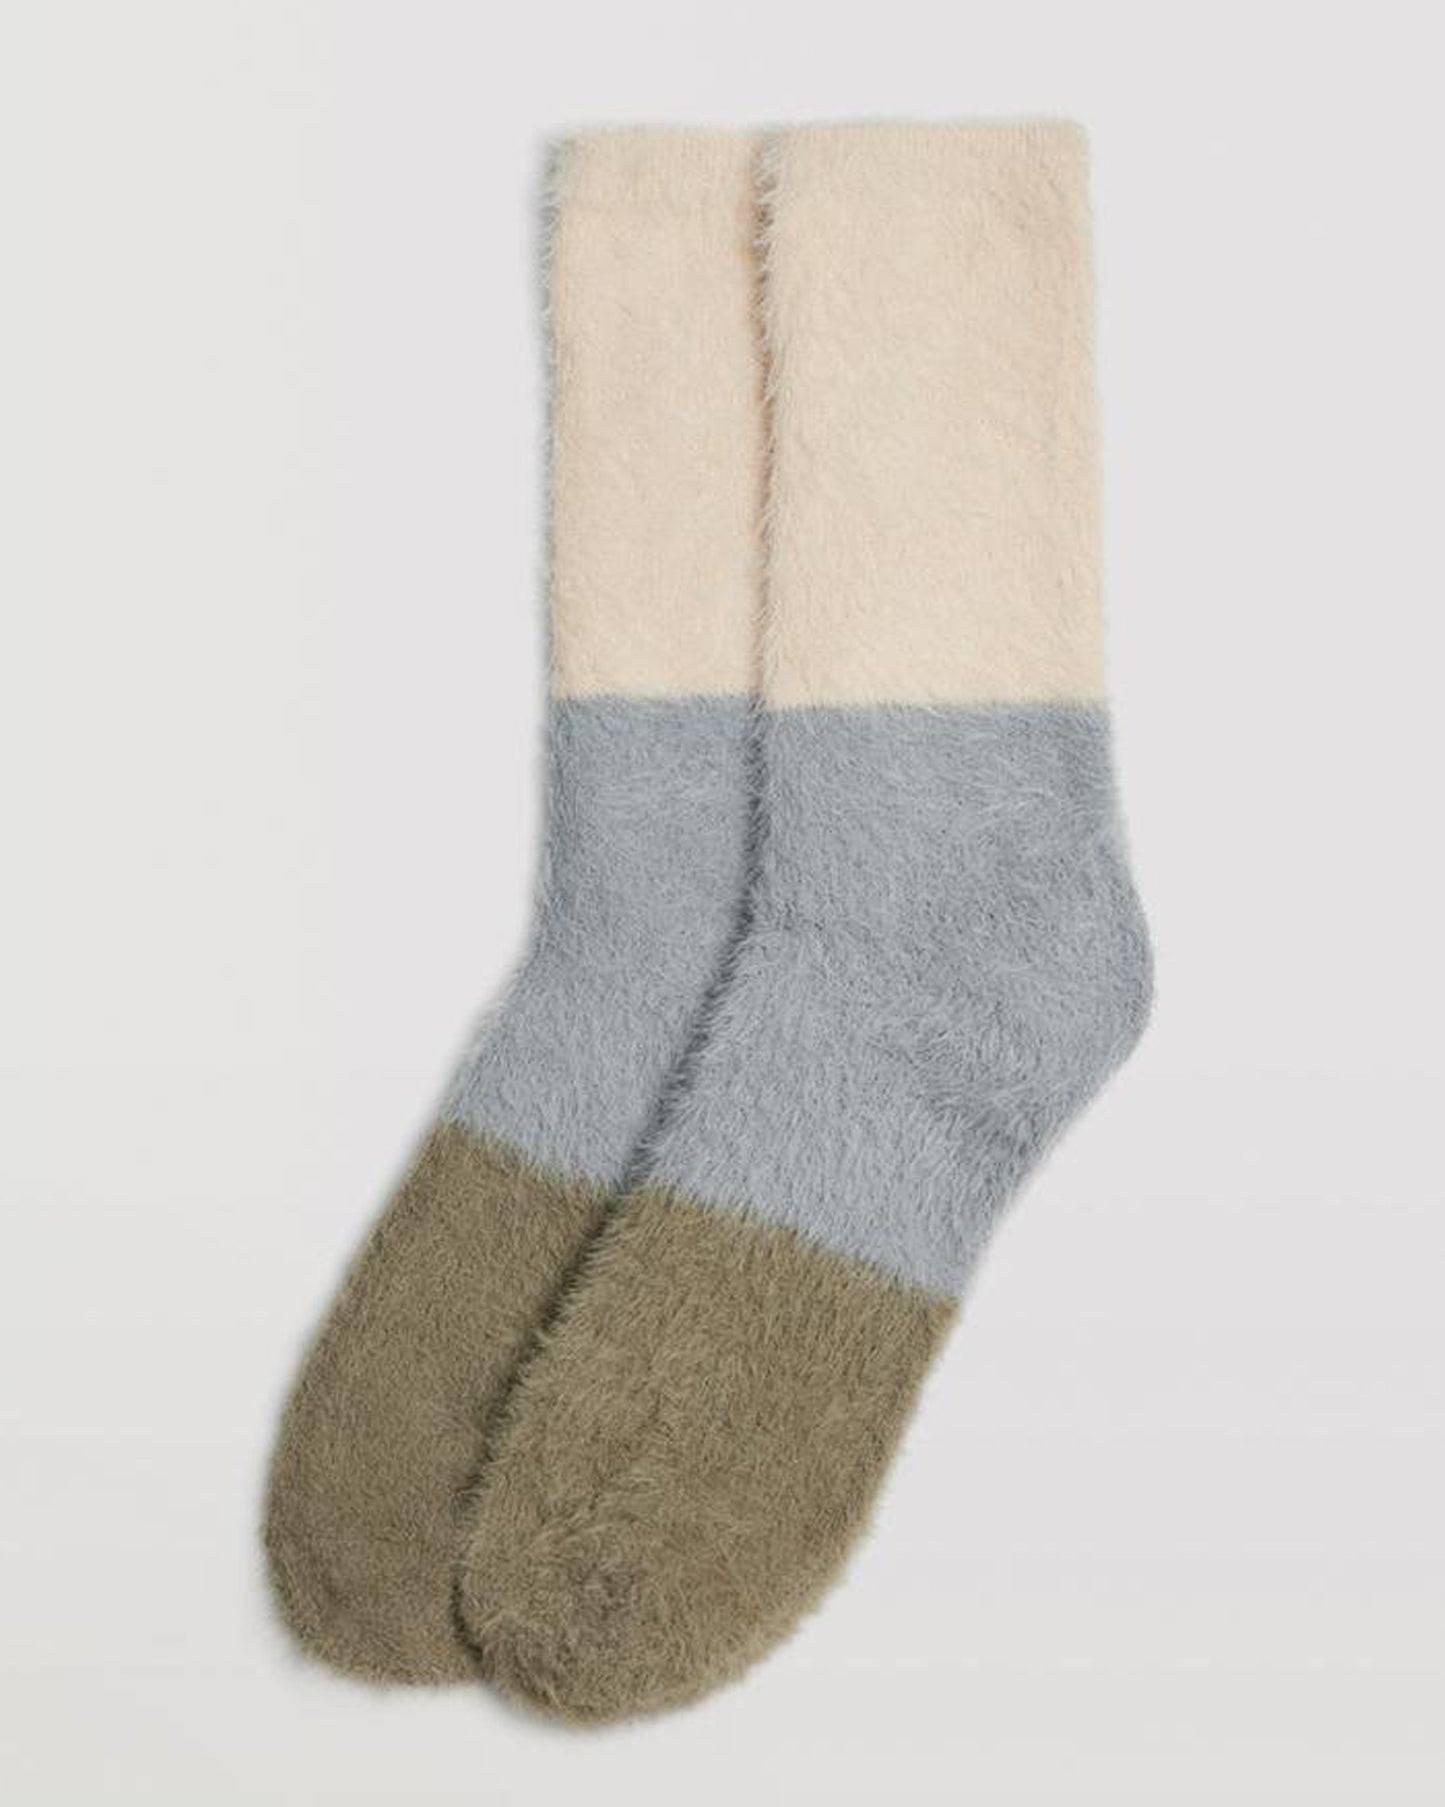 Ysabel Mora 12898 Fluffy Tricolour Socks - Soft and fluffy socks with 3 panels of colour, anti-pressure cuff in beige/grey/khaki green